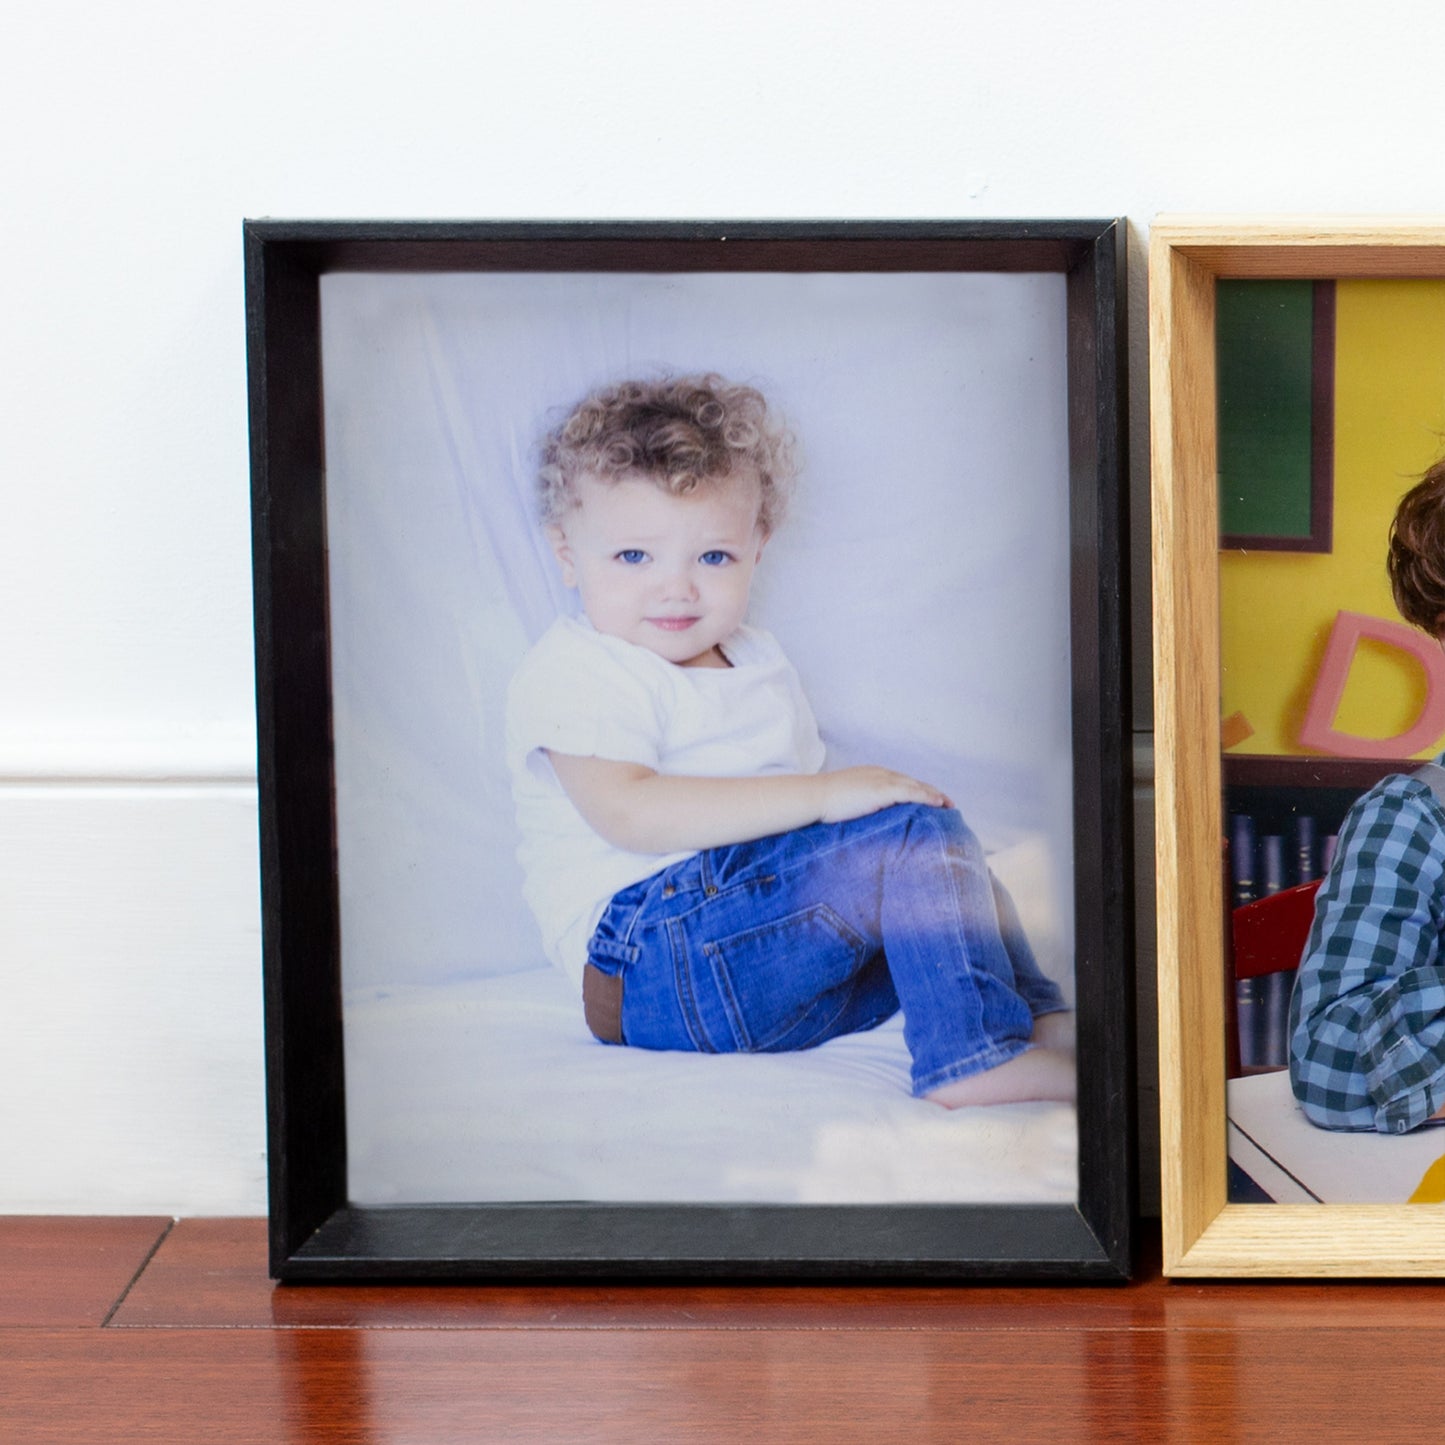 8" x 10" Shadow Box Picture Frame